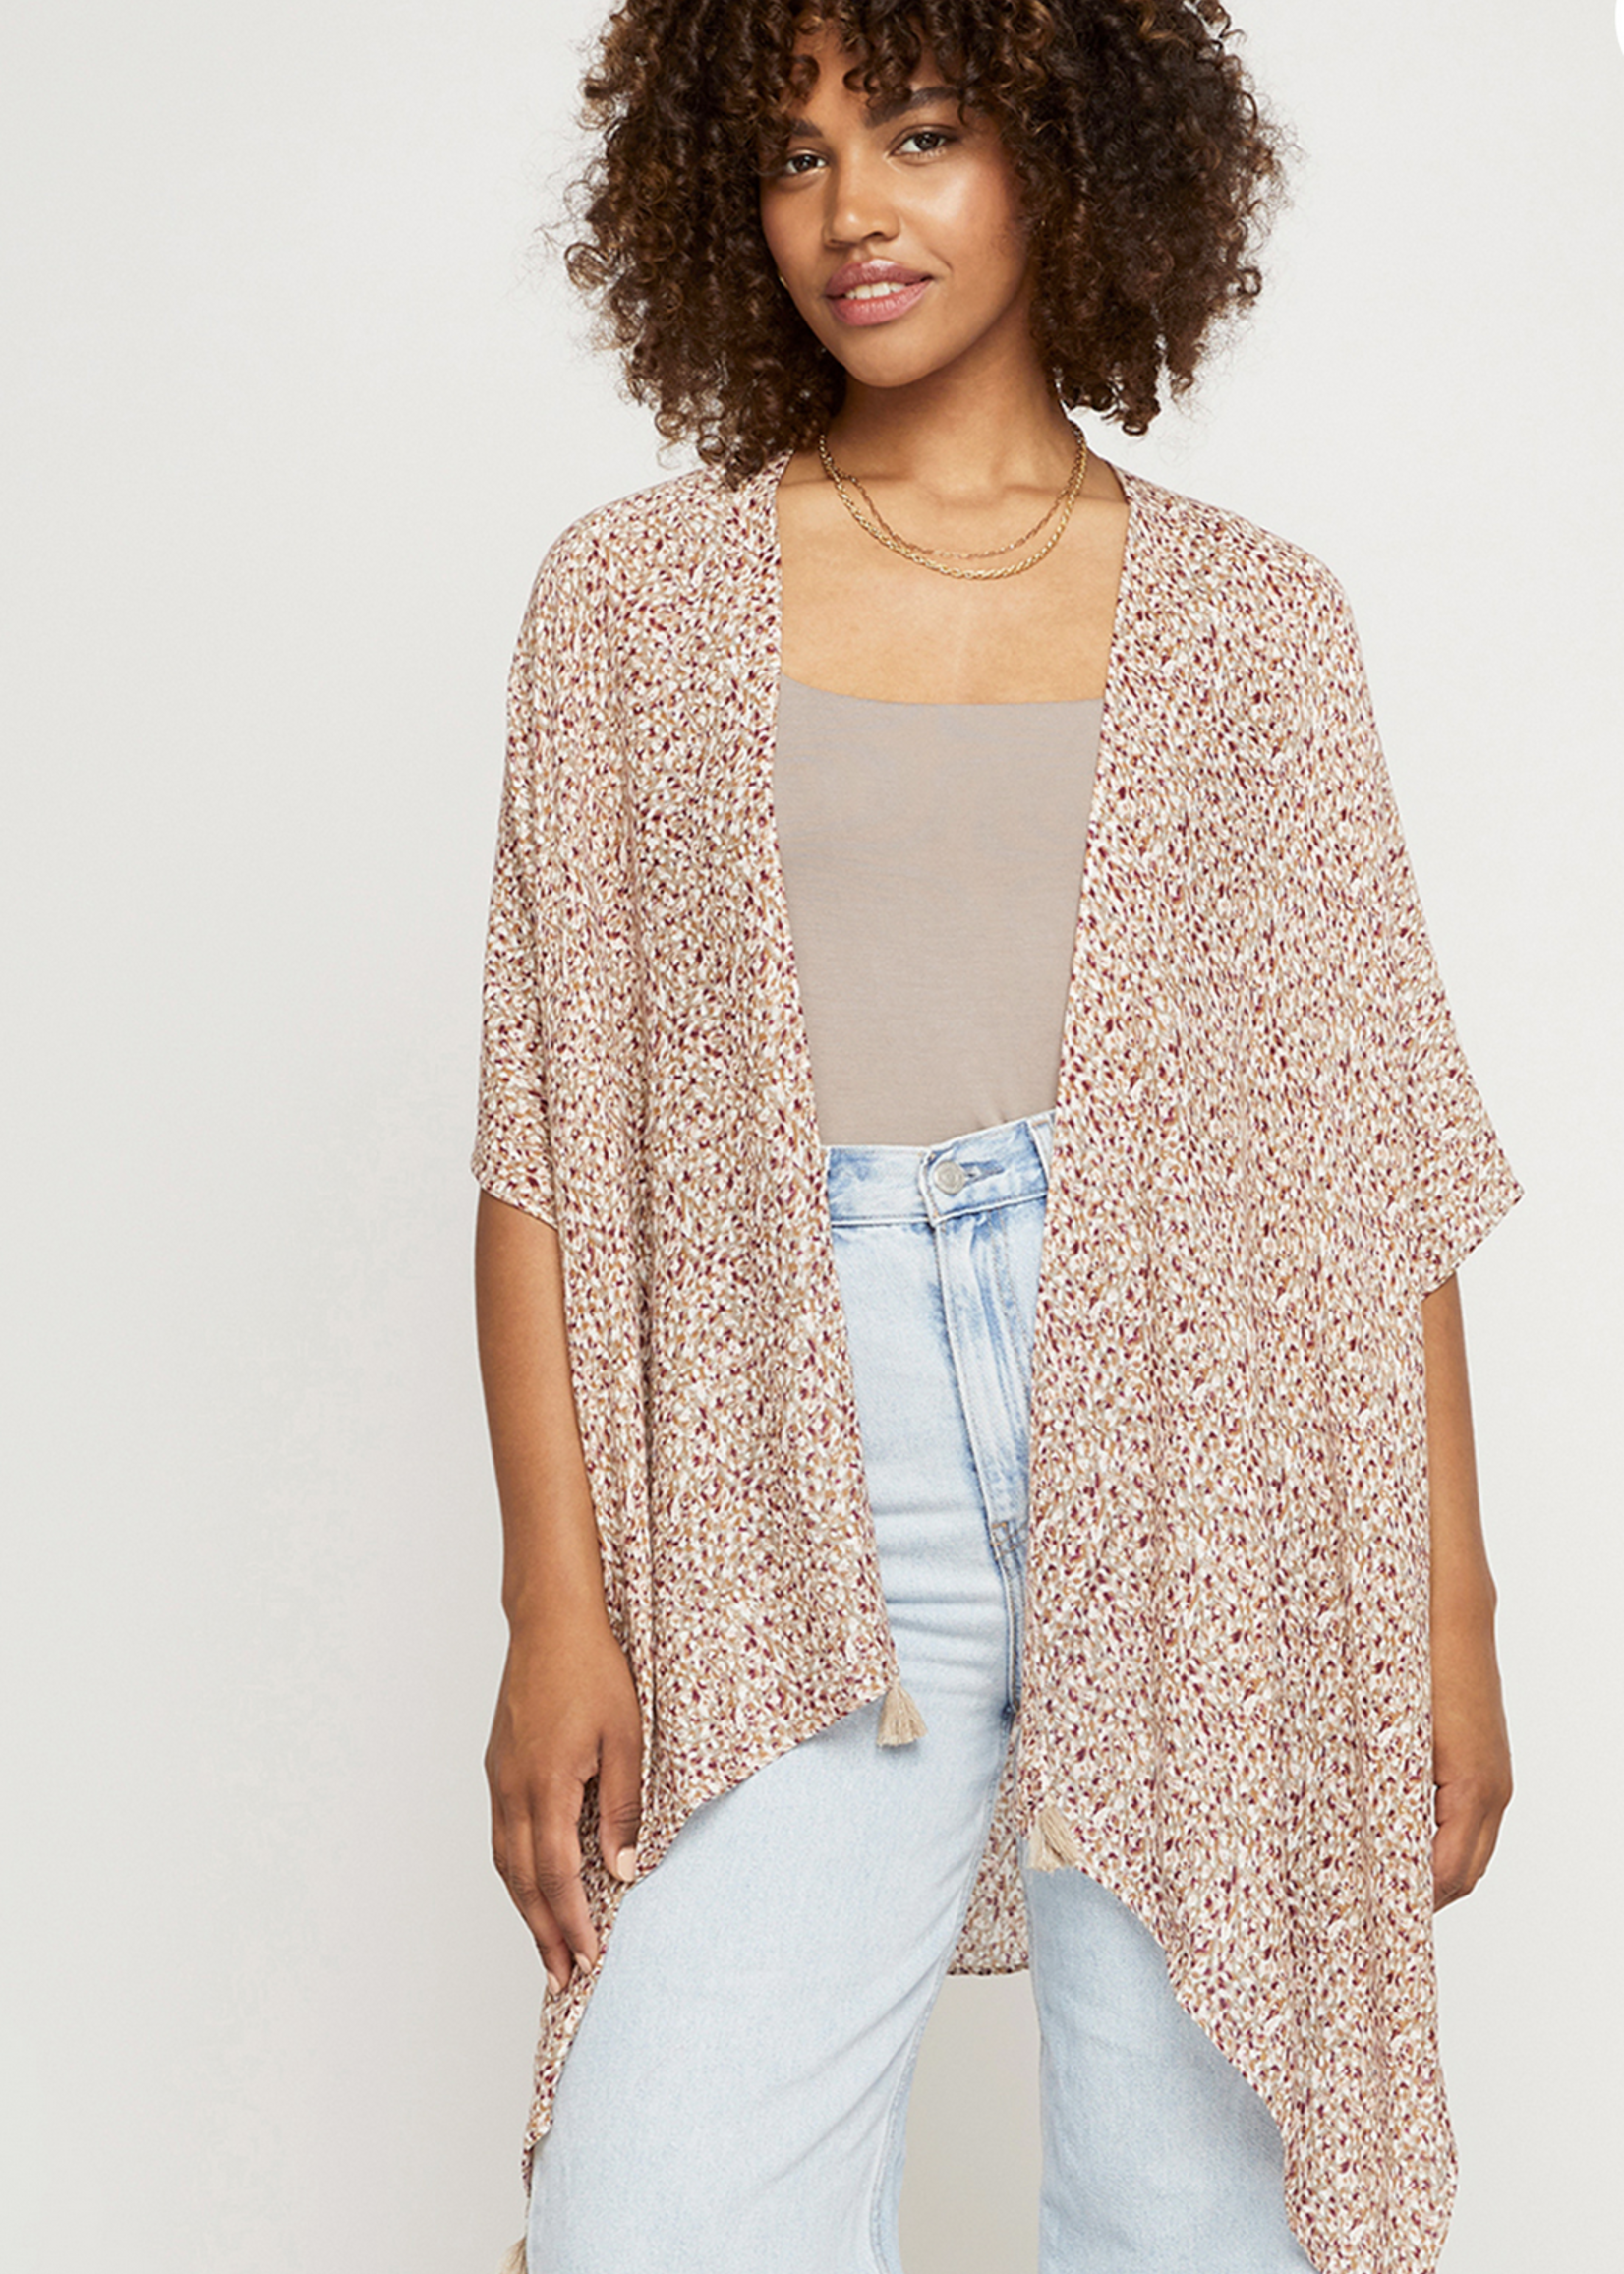 GENTLE FAWN LEDGER COVER-UP